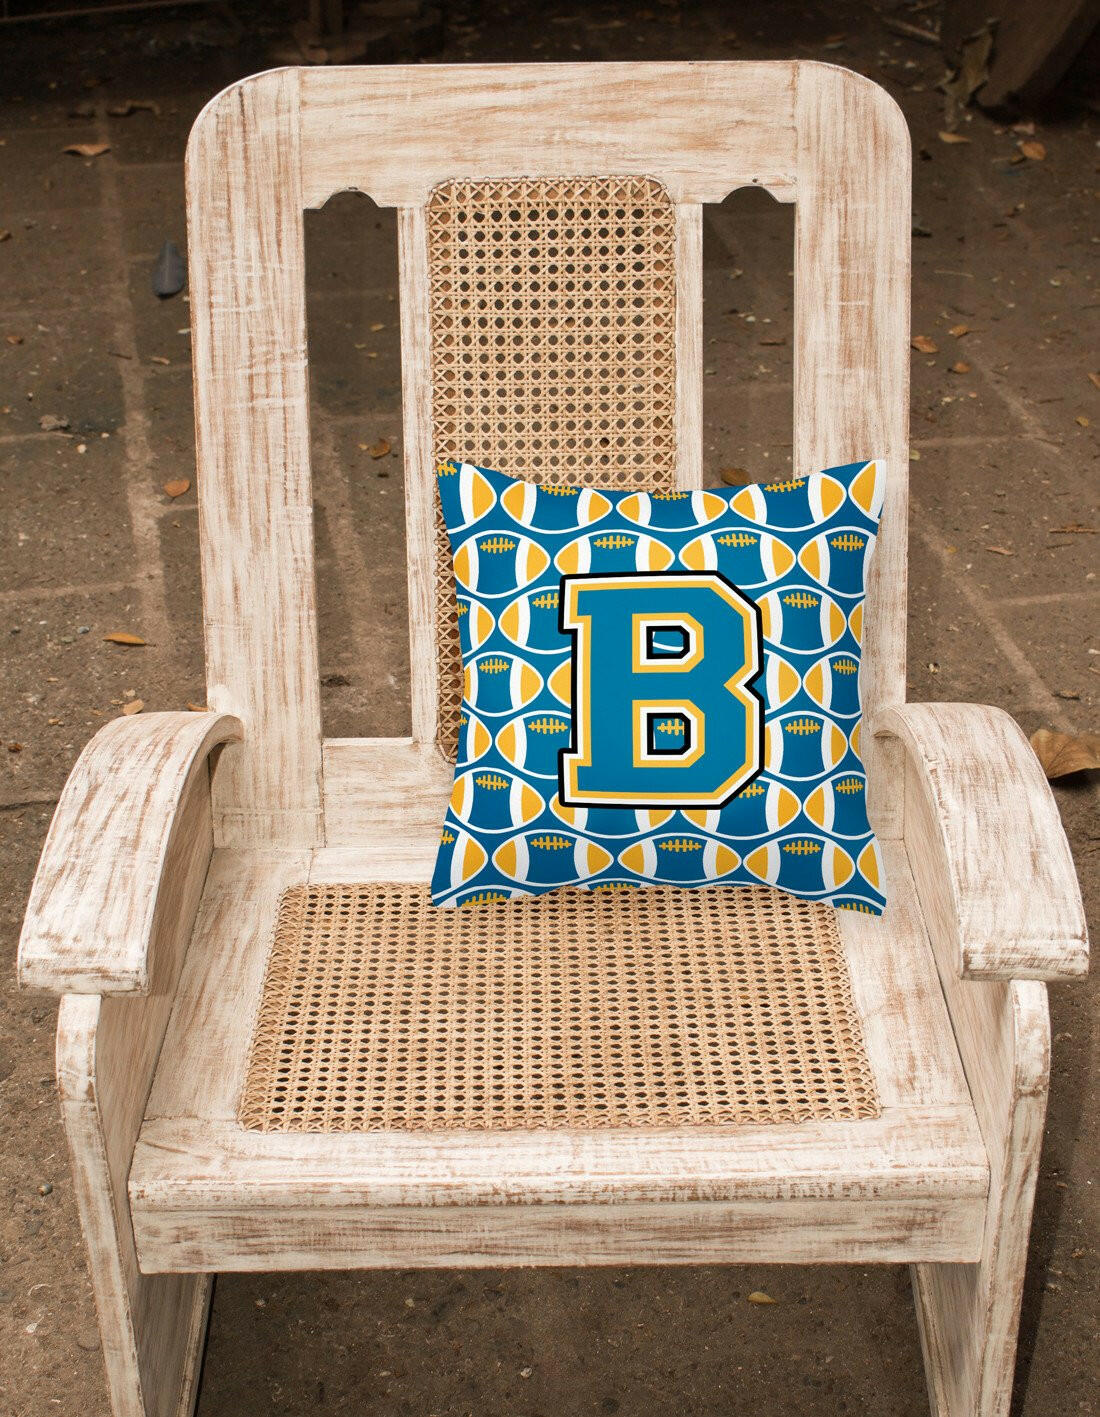 Letter B Football Blue and Gold Fabric Decorative Pillow CJ1077-BPW1414 by Caroline's Treasures